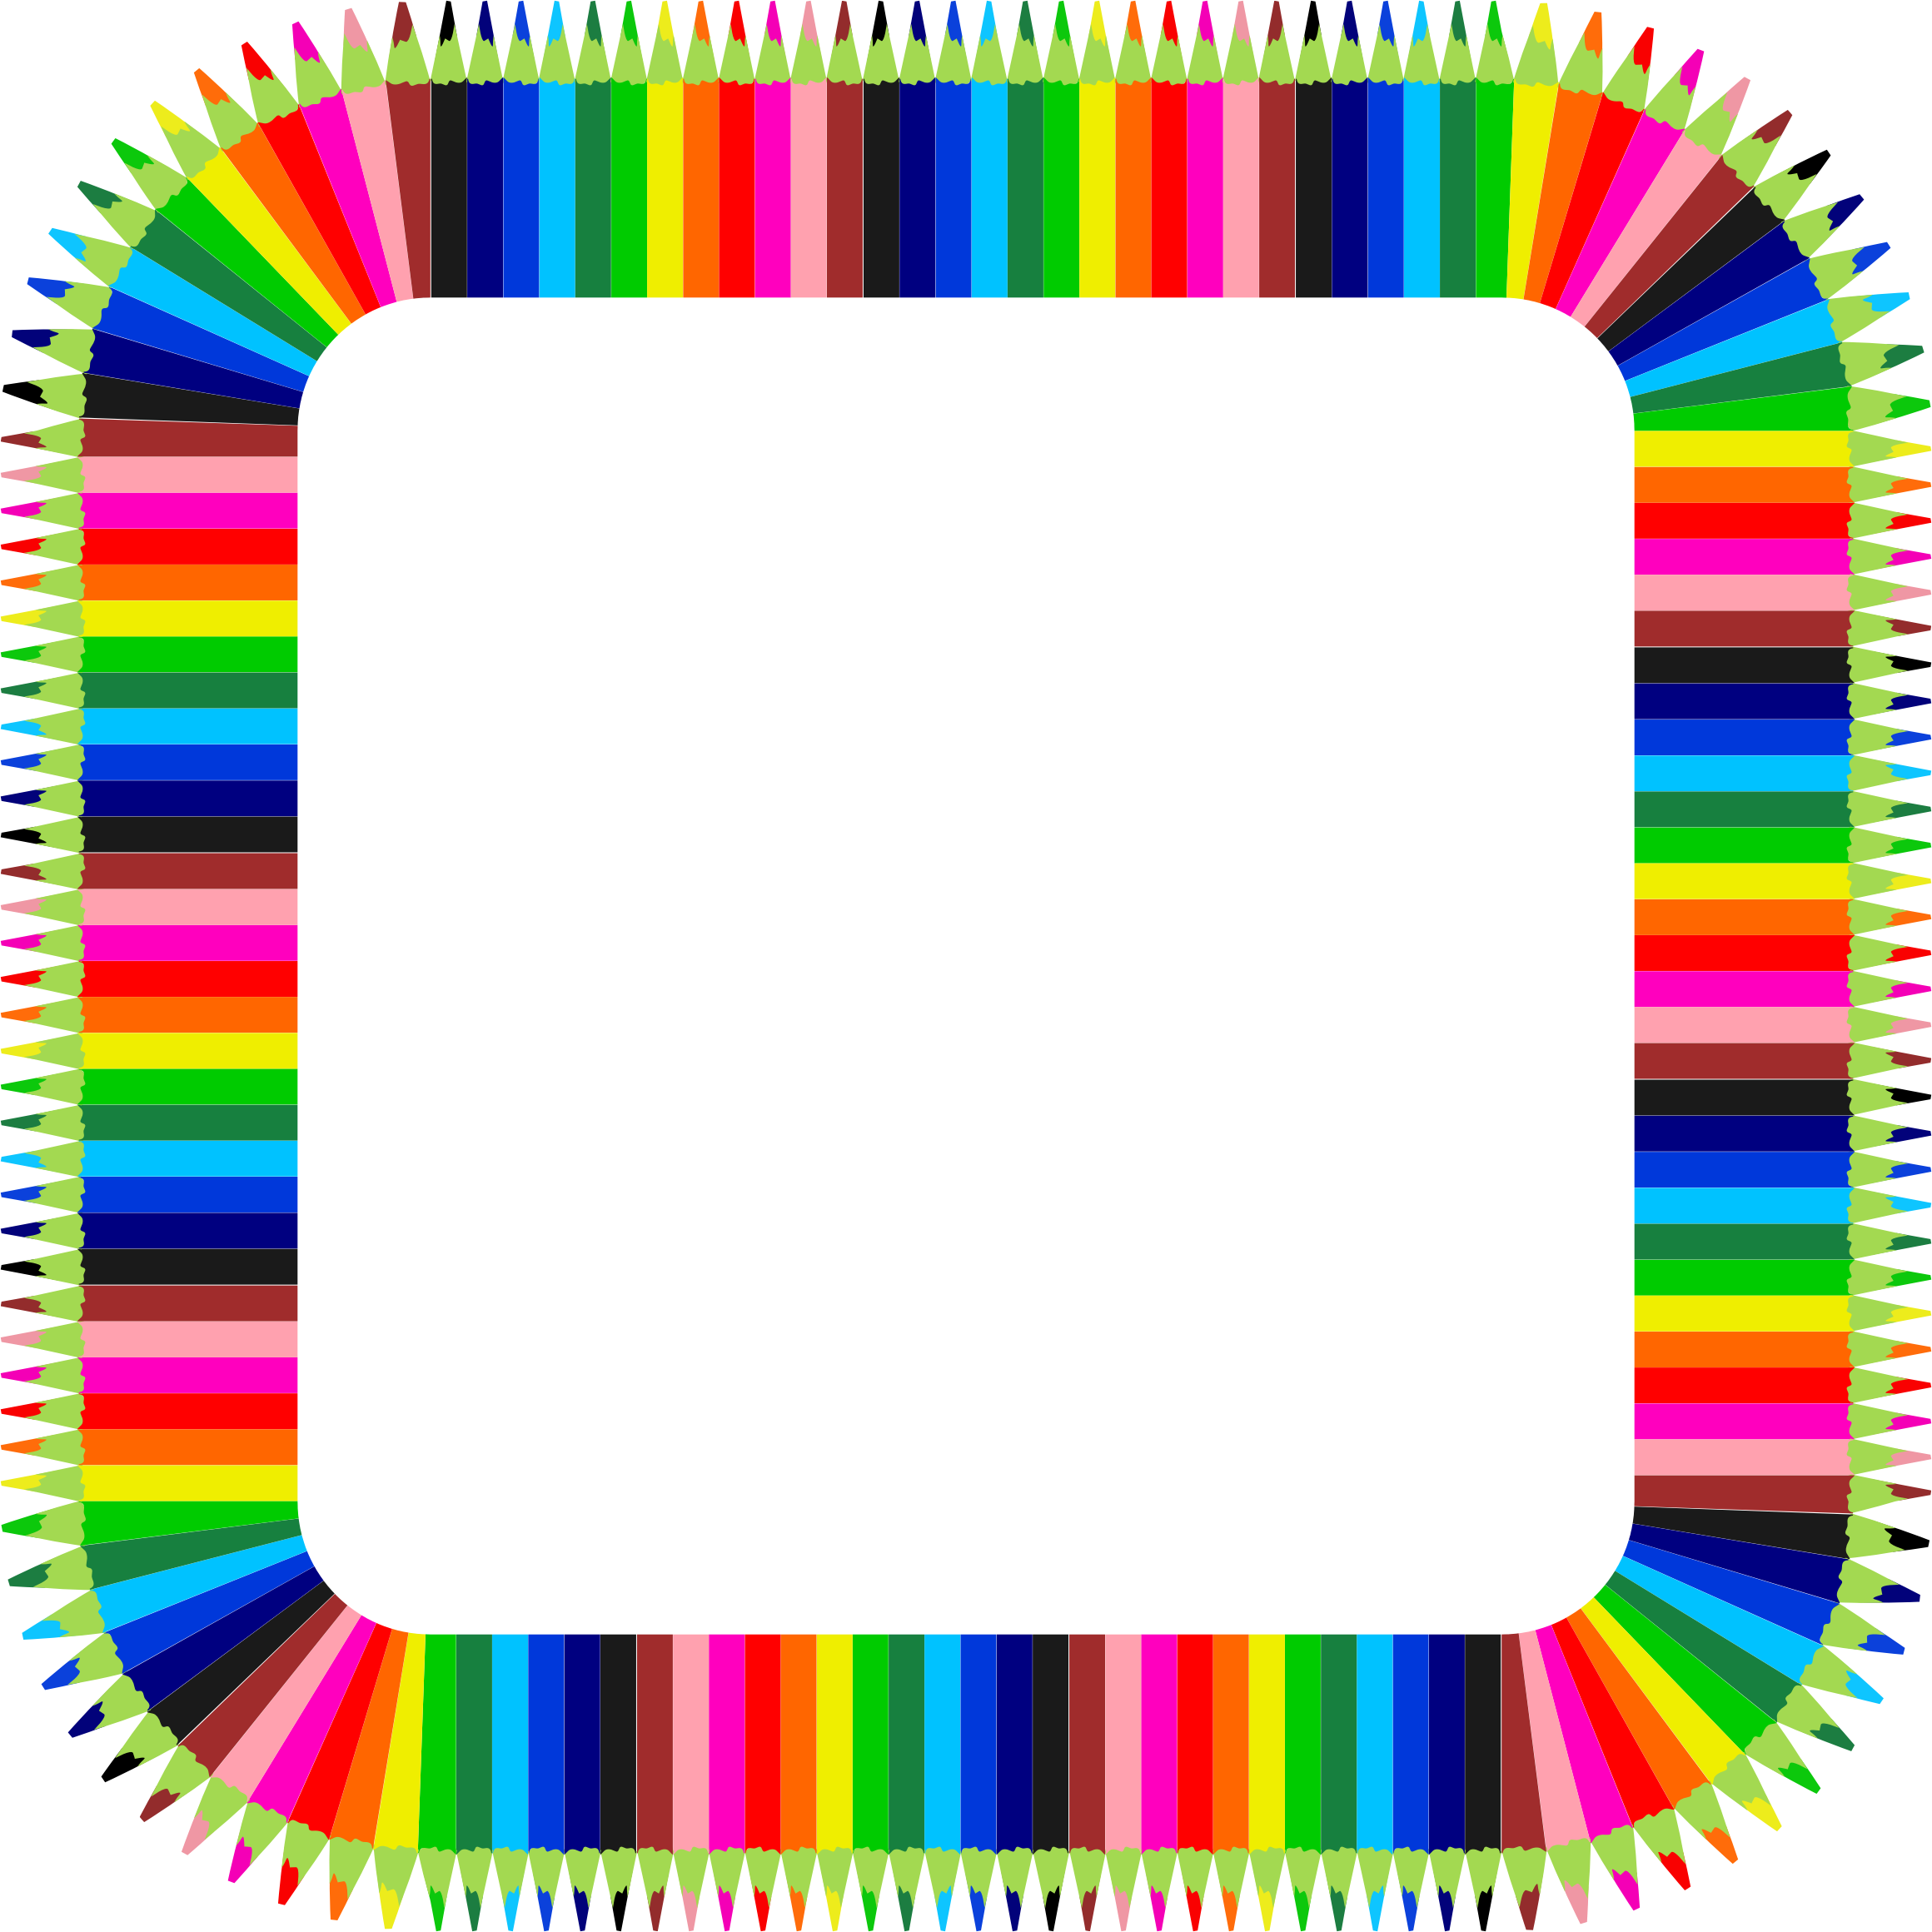 Frame clipart colorful, Frame colorful Transparent FREE for